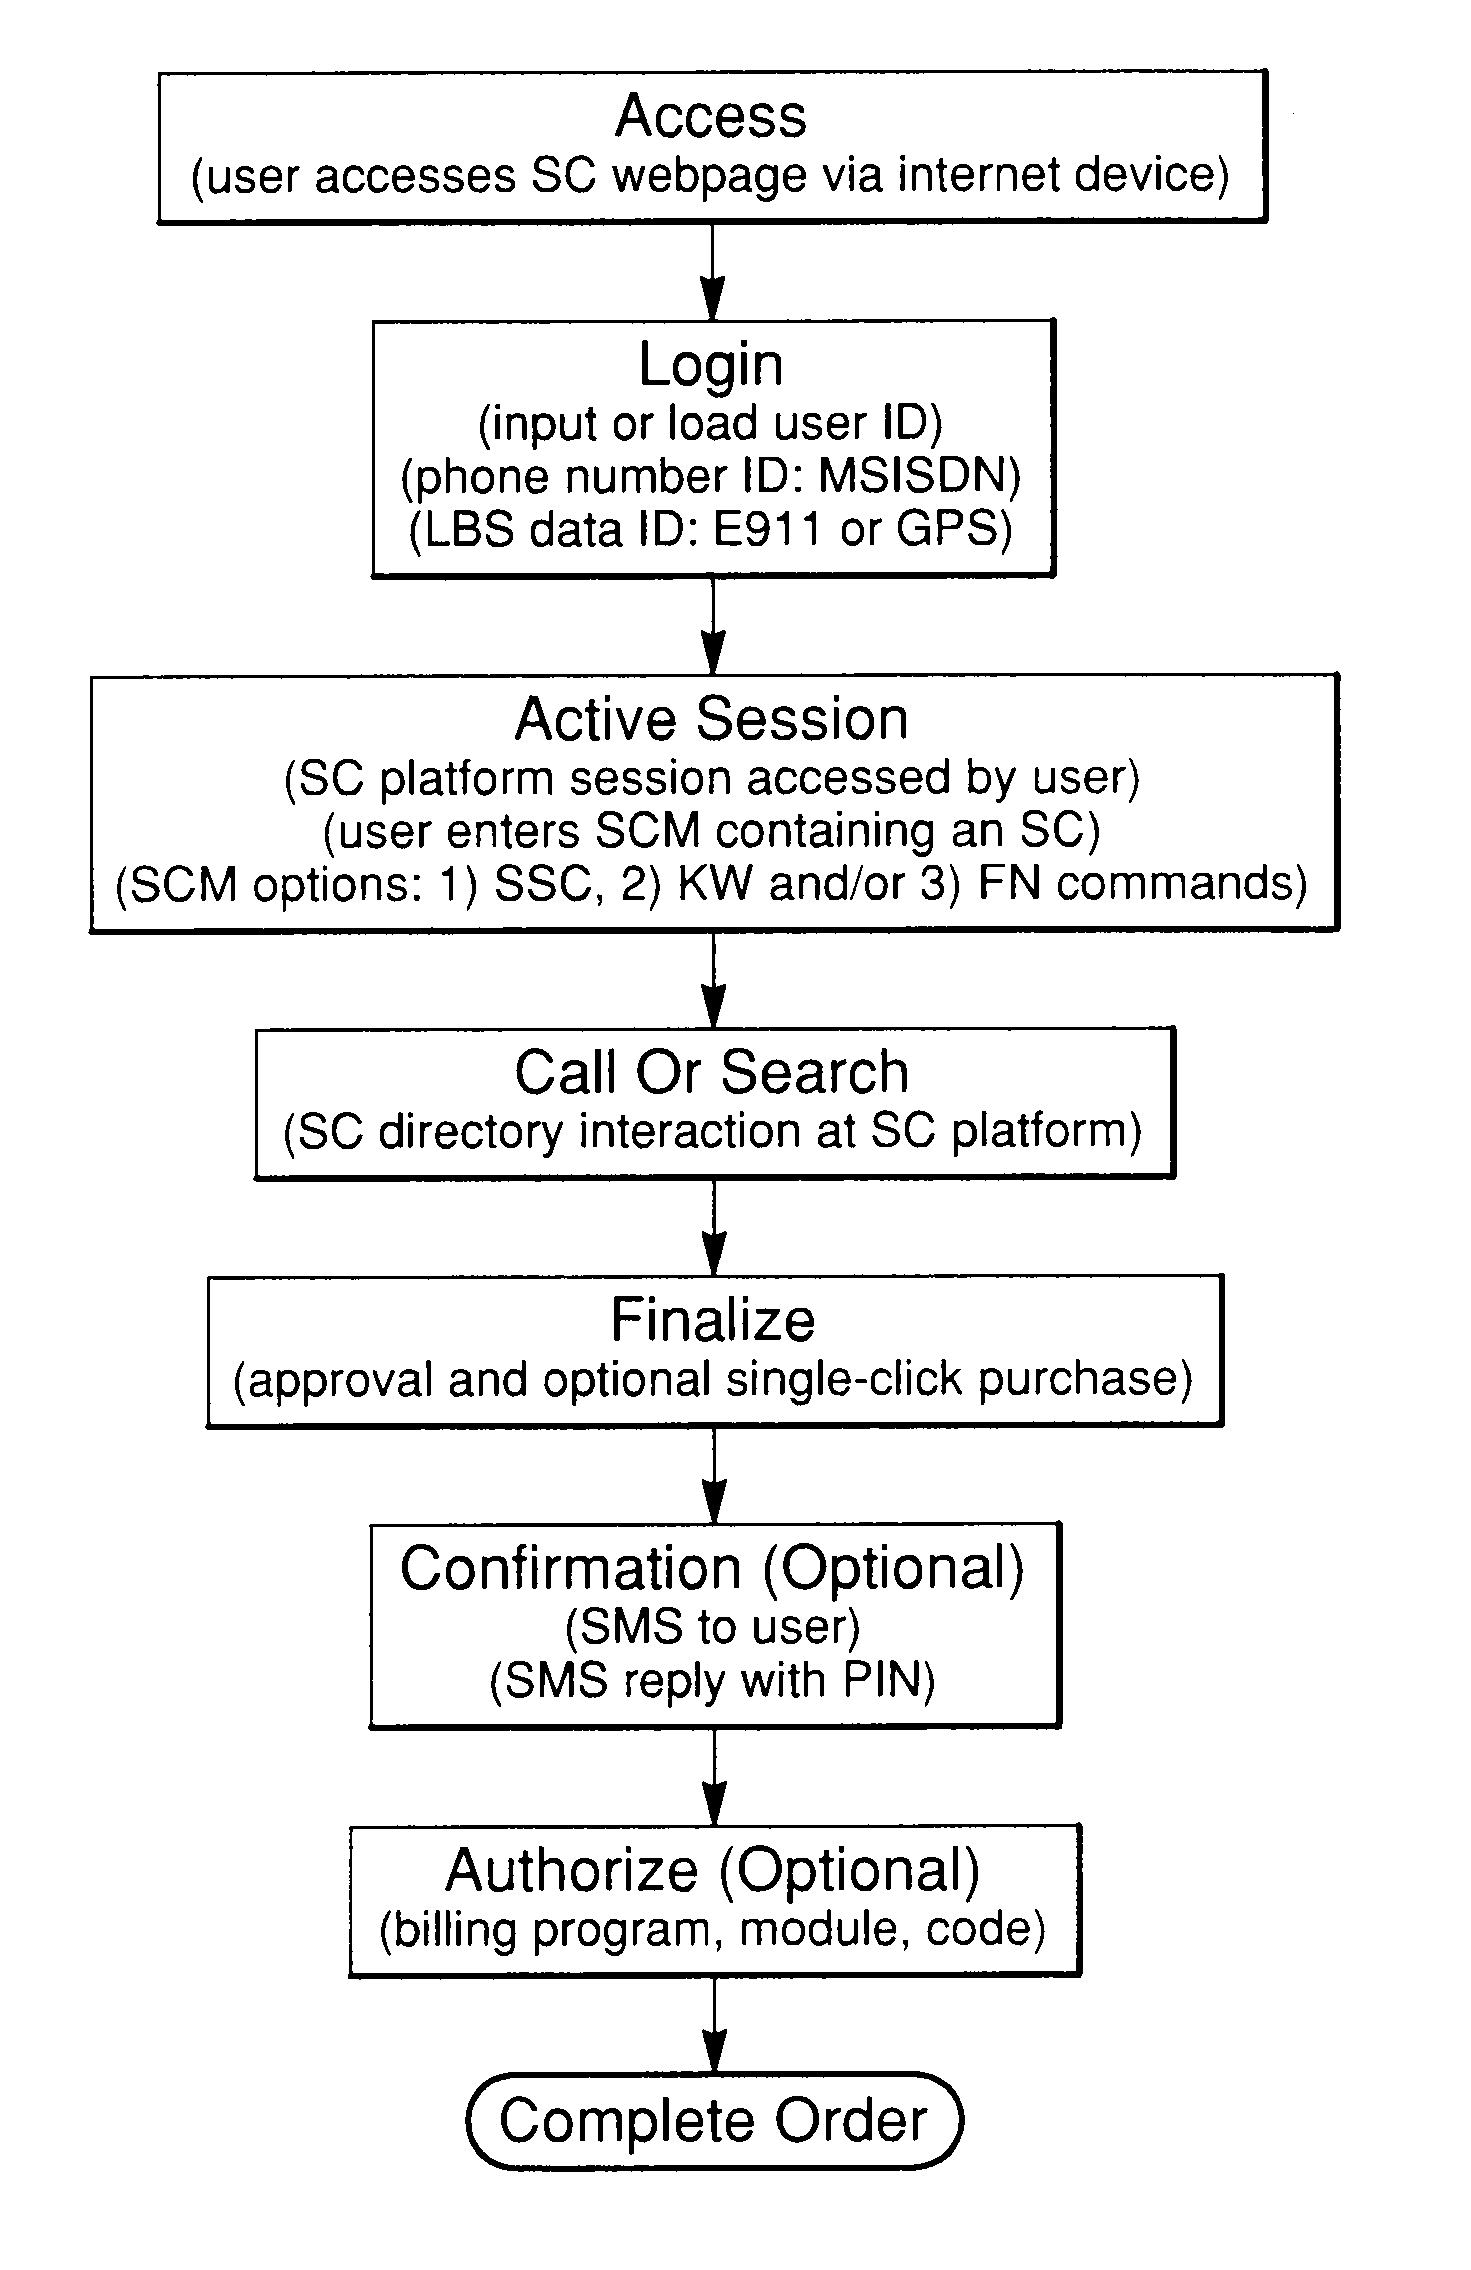 System and method for using symbol command language within a communications network via SMS or internet communications protocols